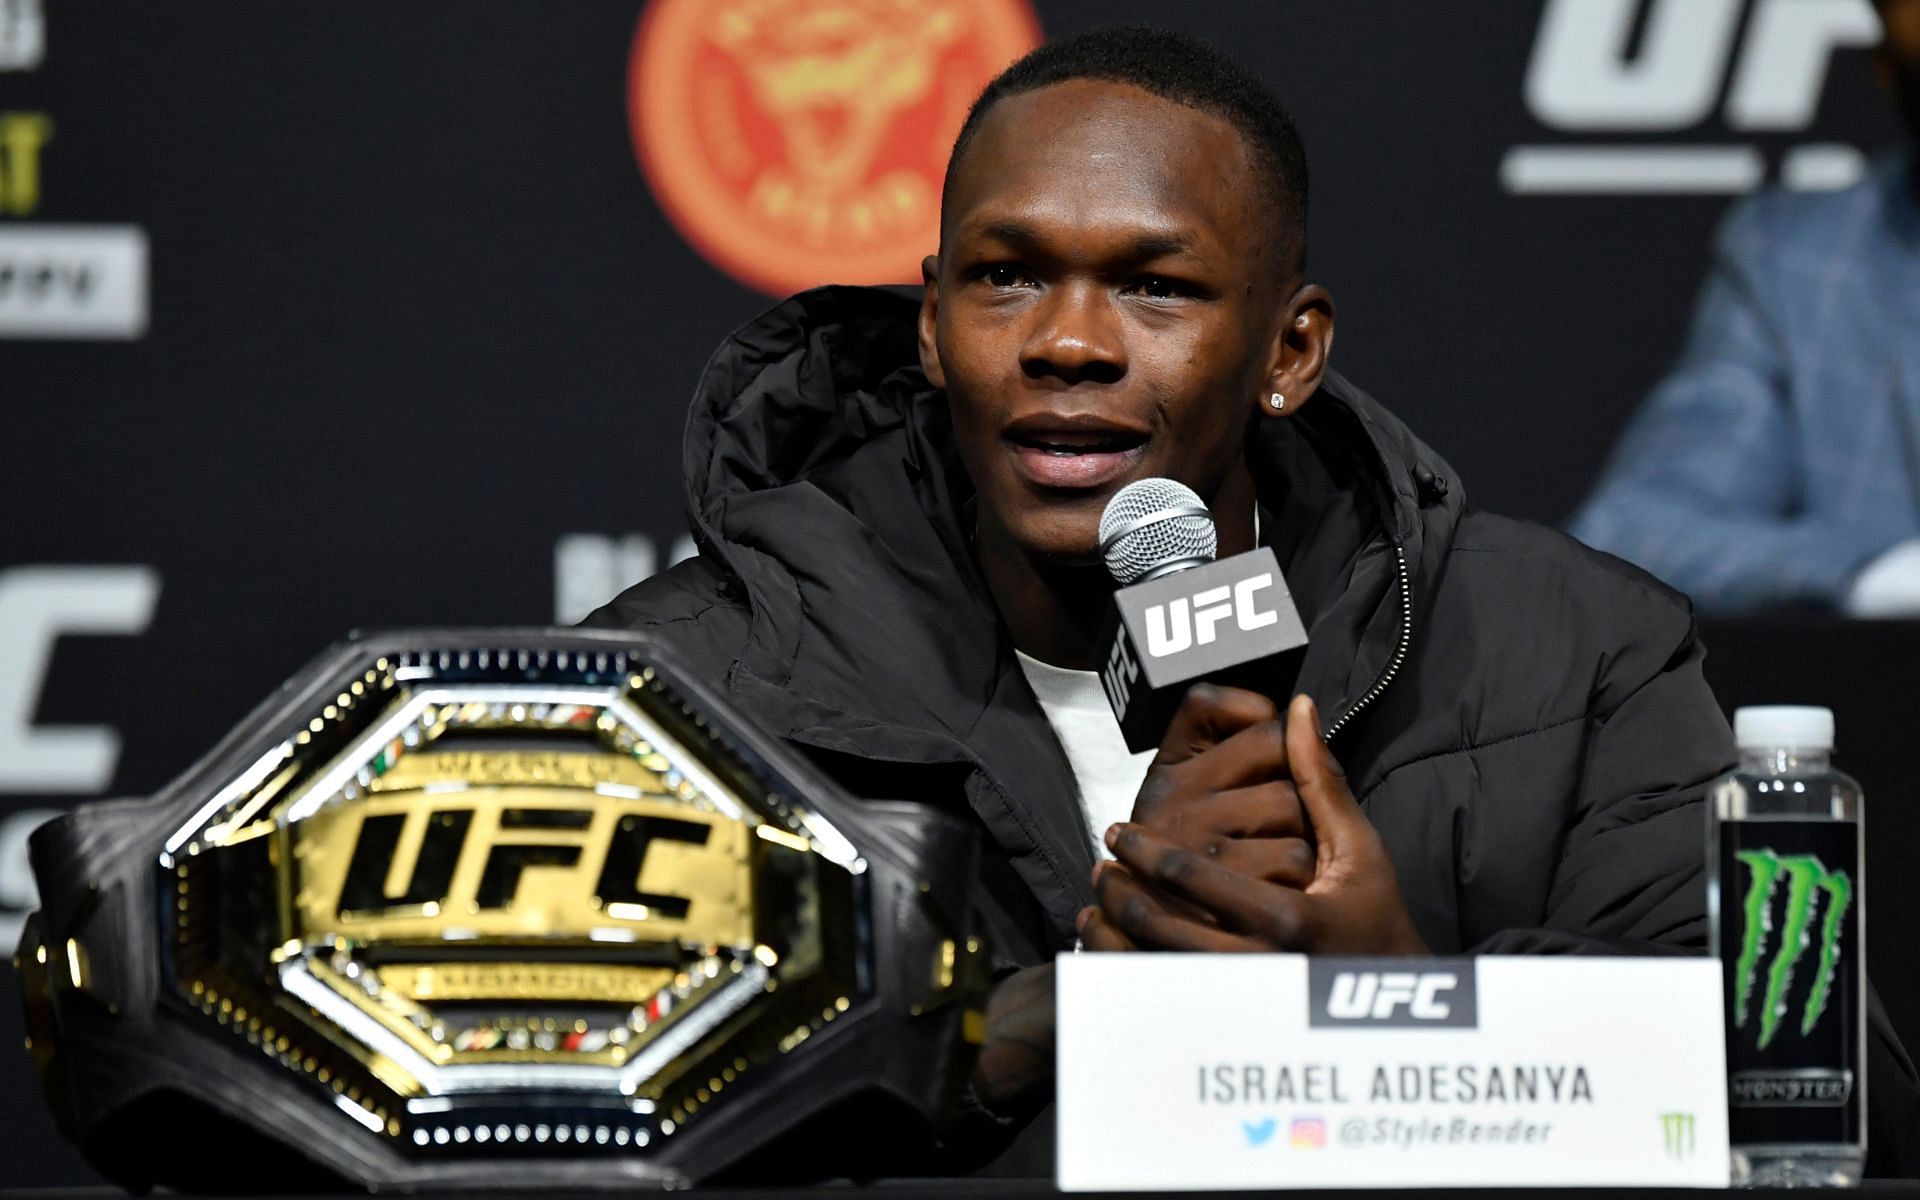 Israel Adesanya is regarded as one of the greatest MMA strikers ever